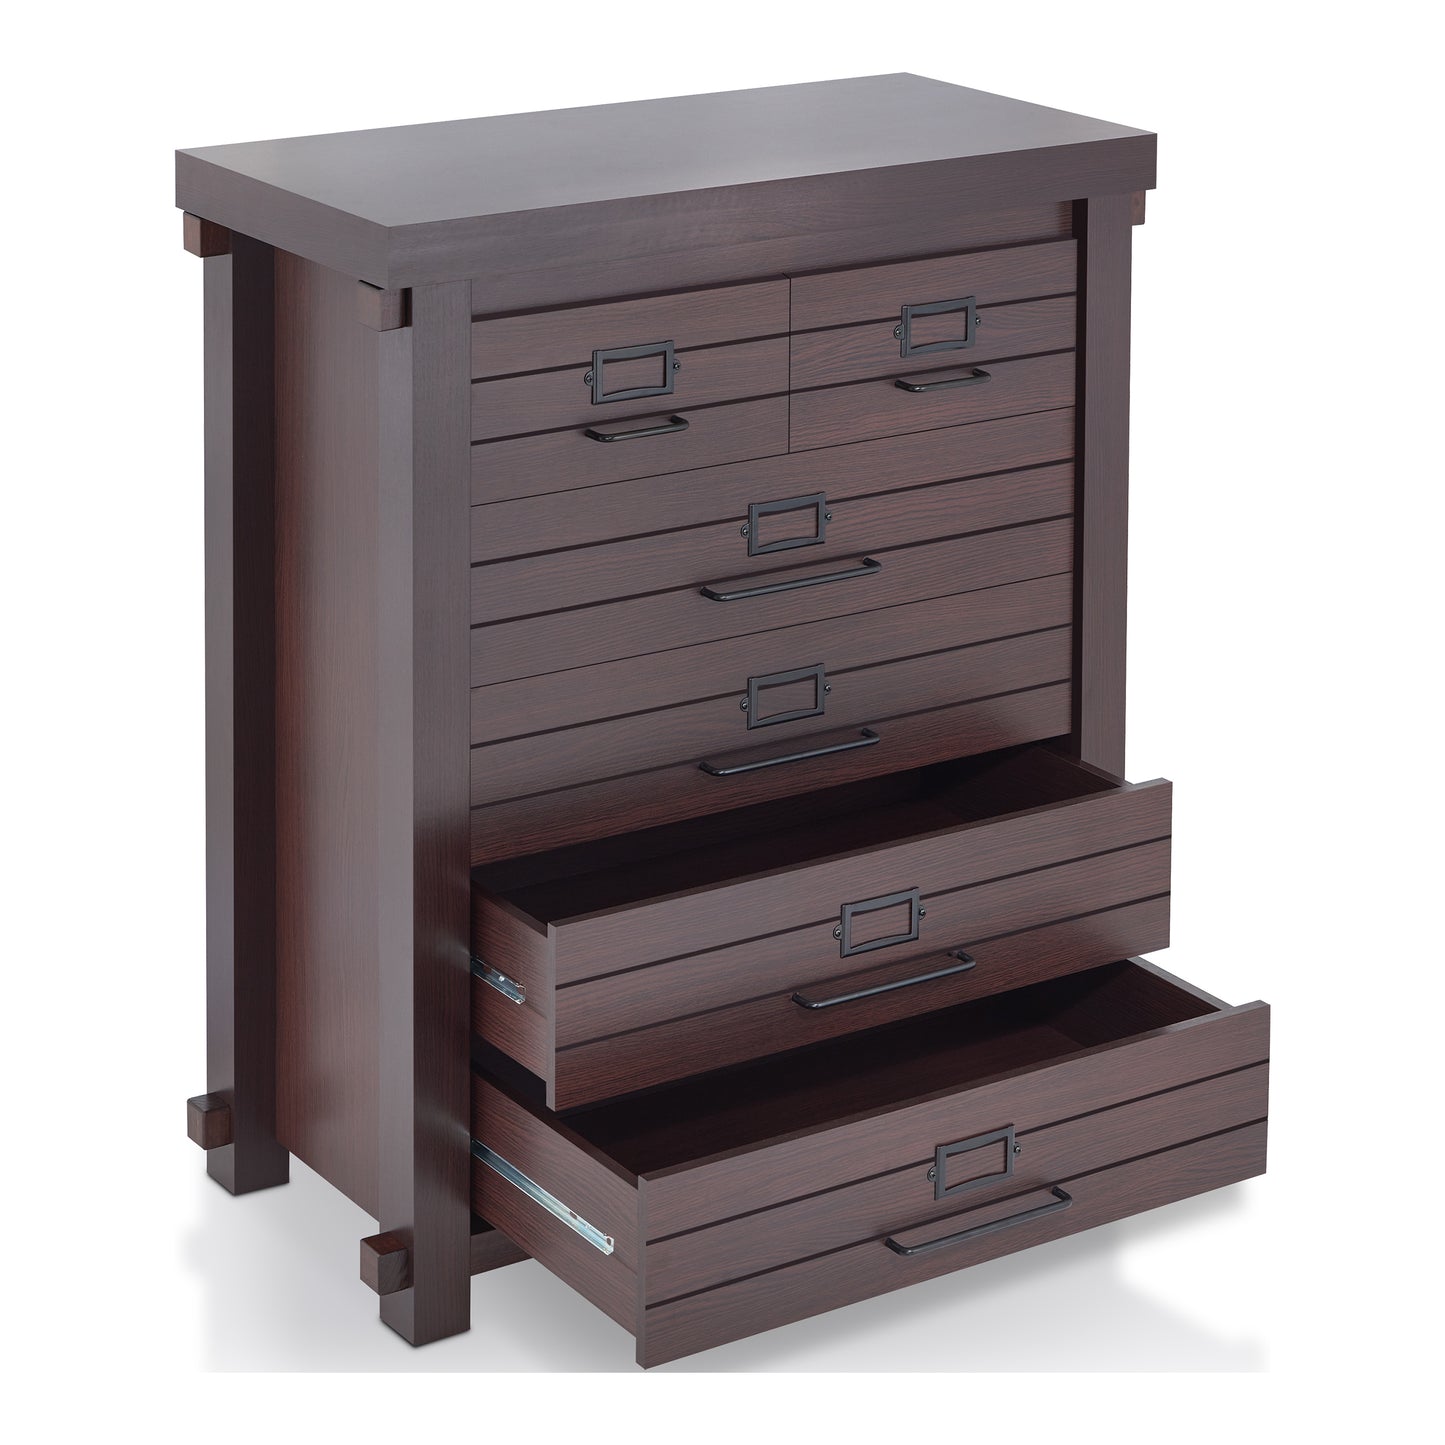 Right angled rustic espresso six-drawer plank chest dresser with two lower drawers open on a white background